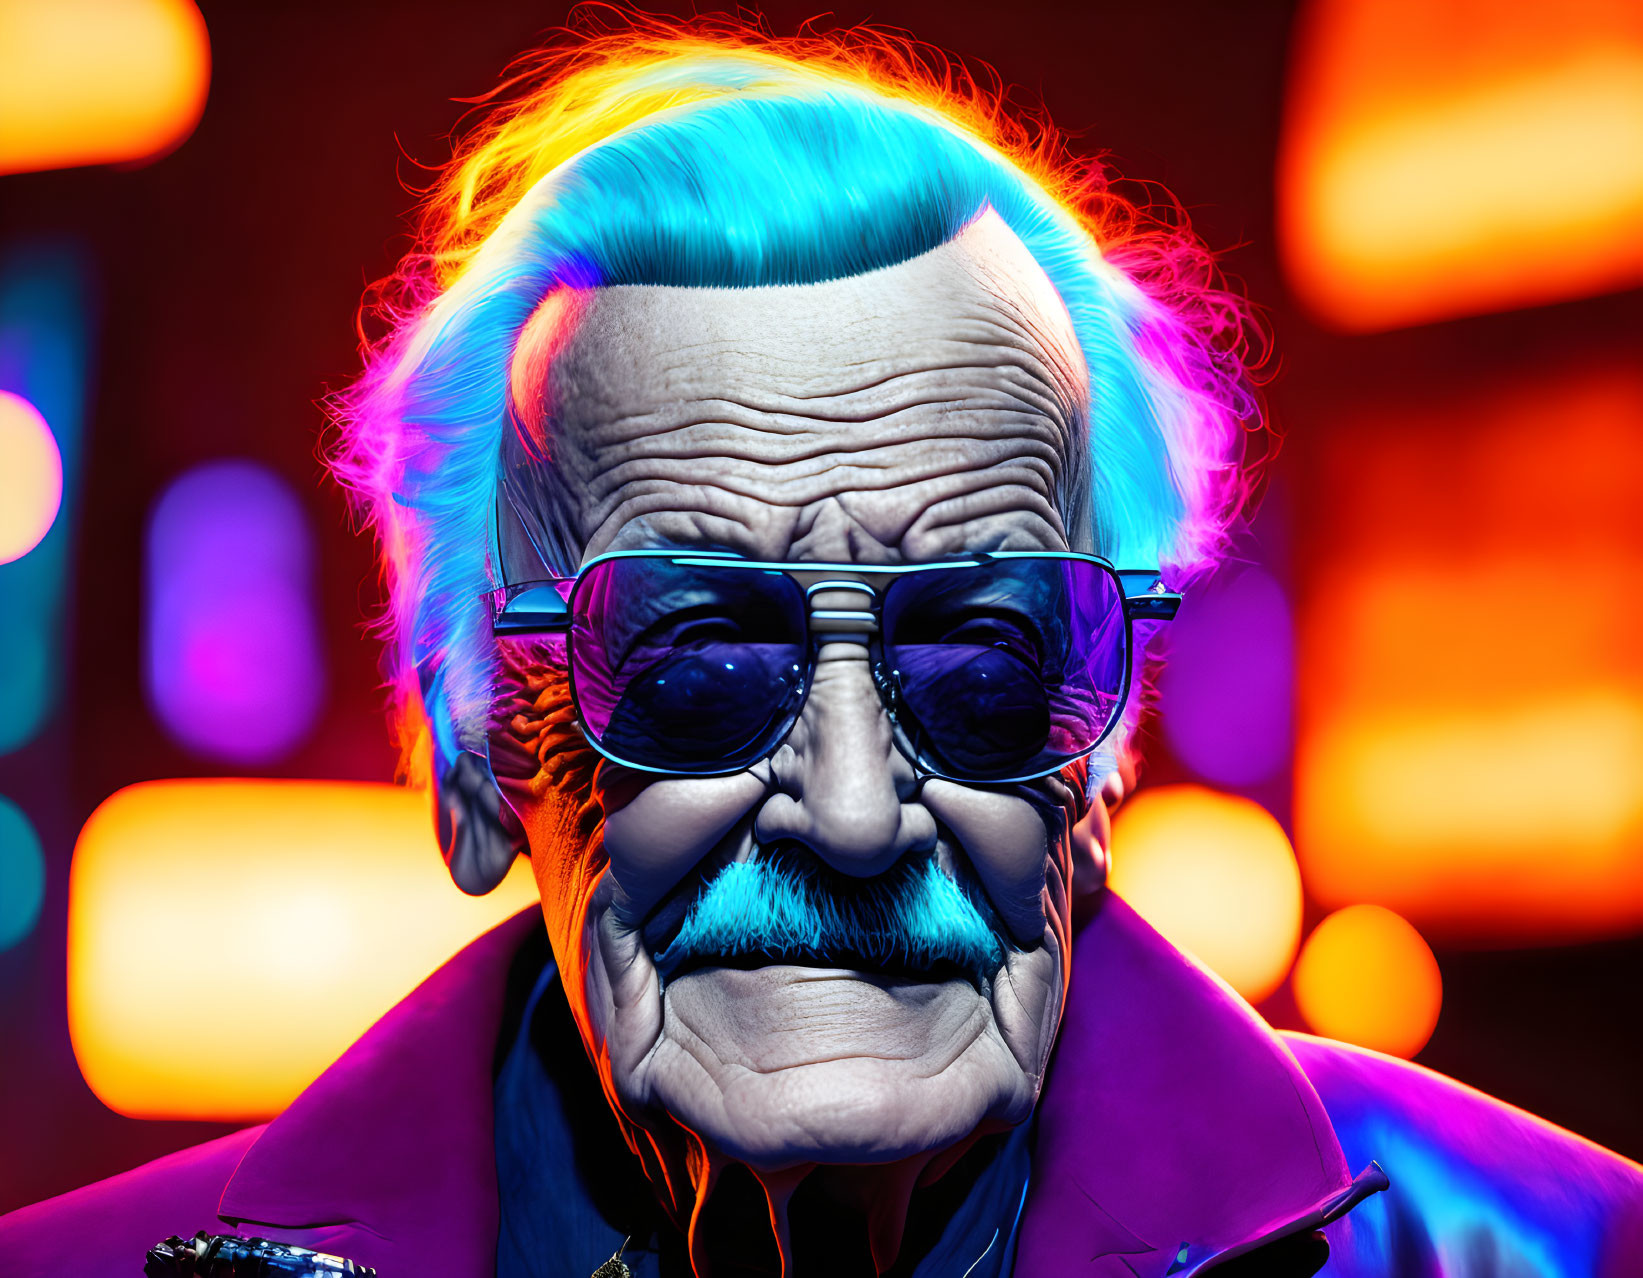 Colorful digital artwork: Elderly man with neon blue hair and stylish glasses on vibrant backdrop